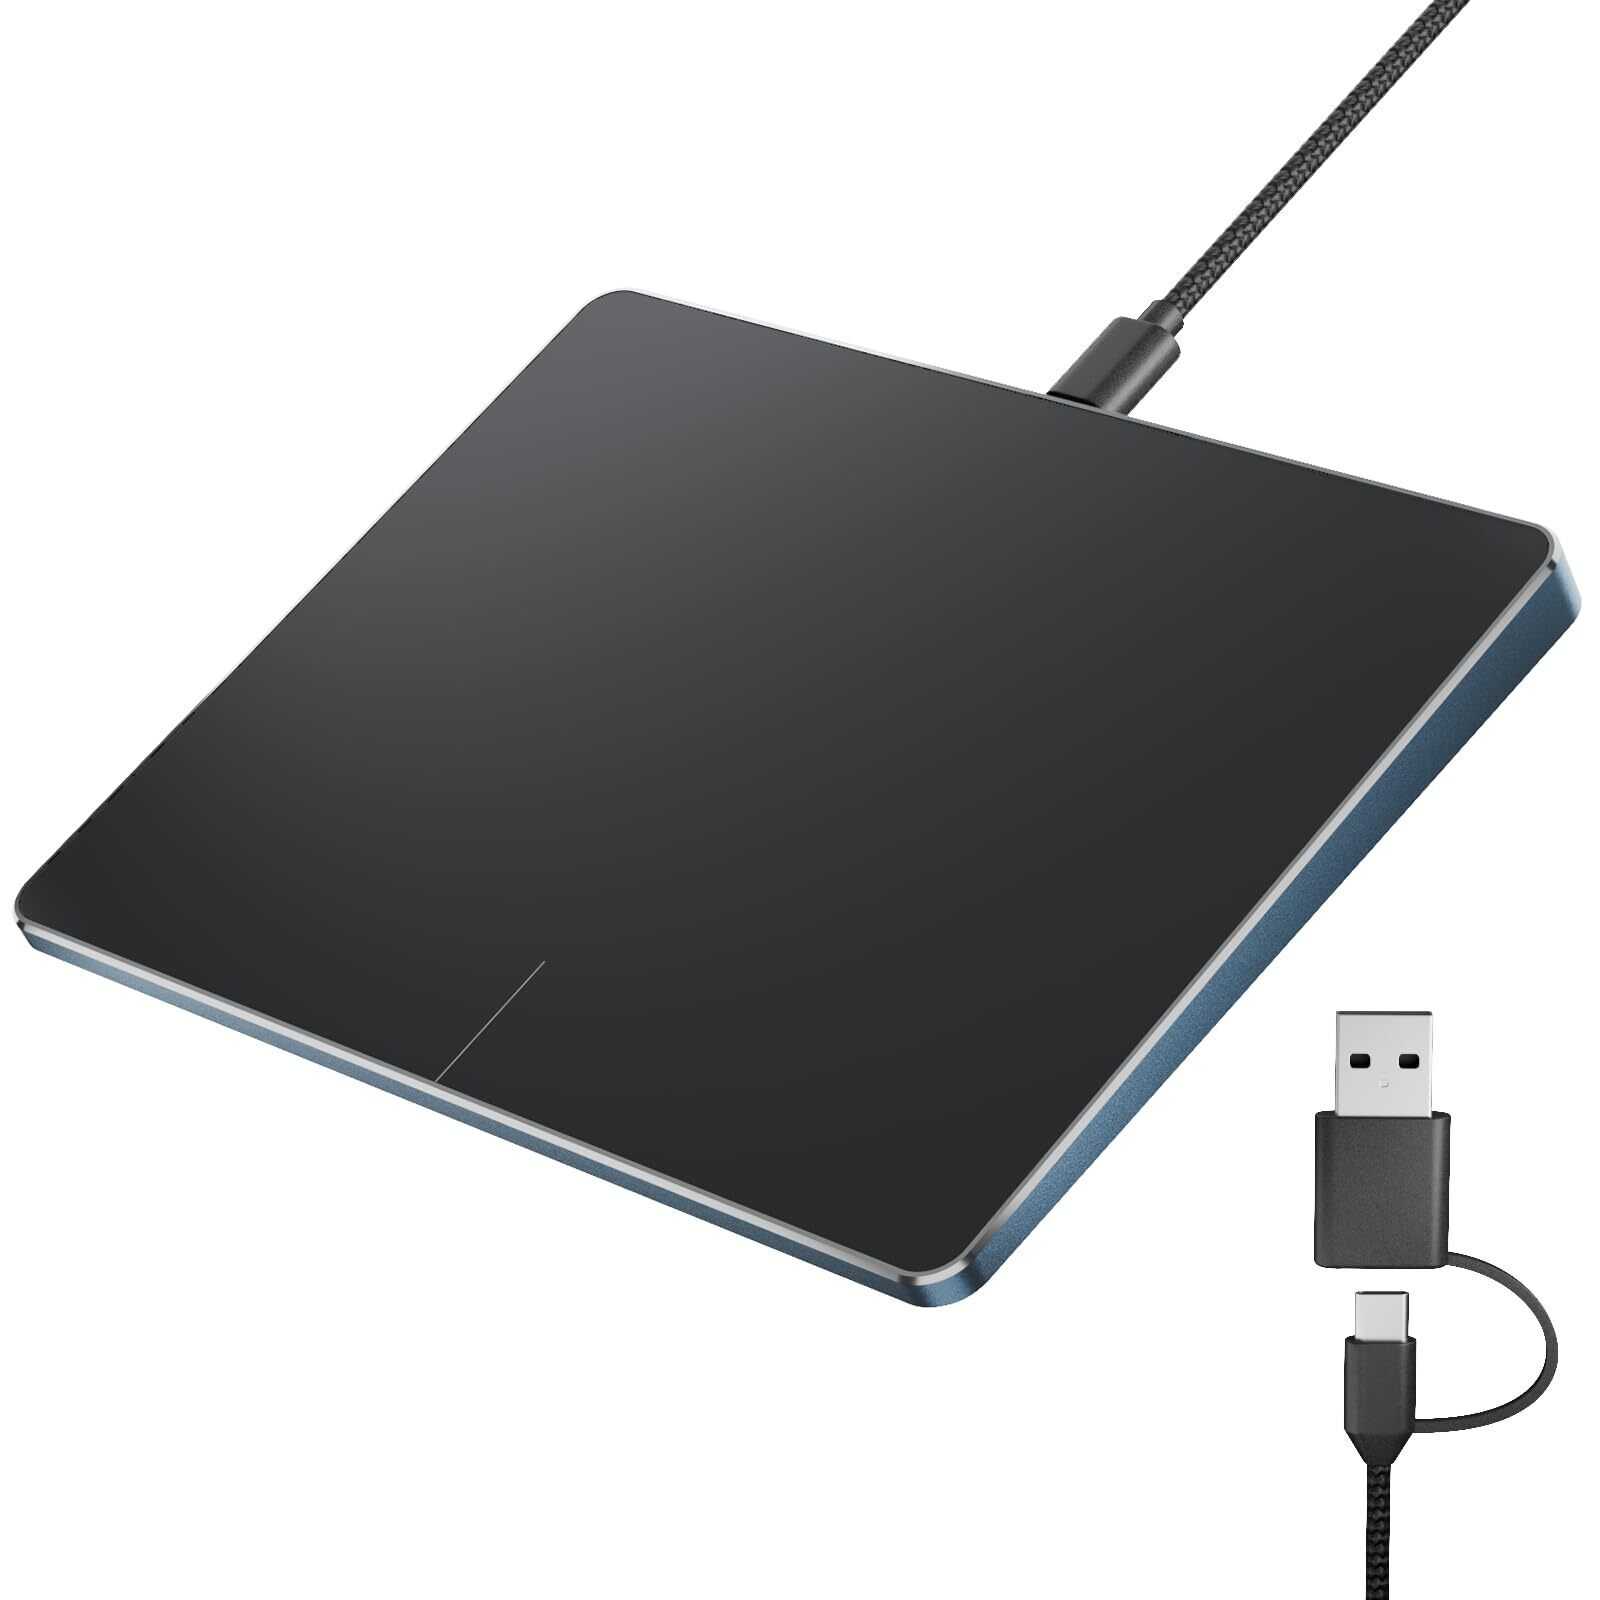 ProtoArc Wired Trackpad for Mac High Precision T1-A Touchpad for Mac USB Slim...